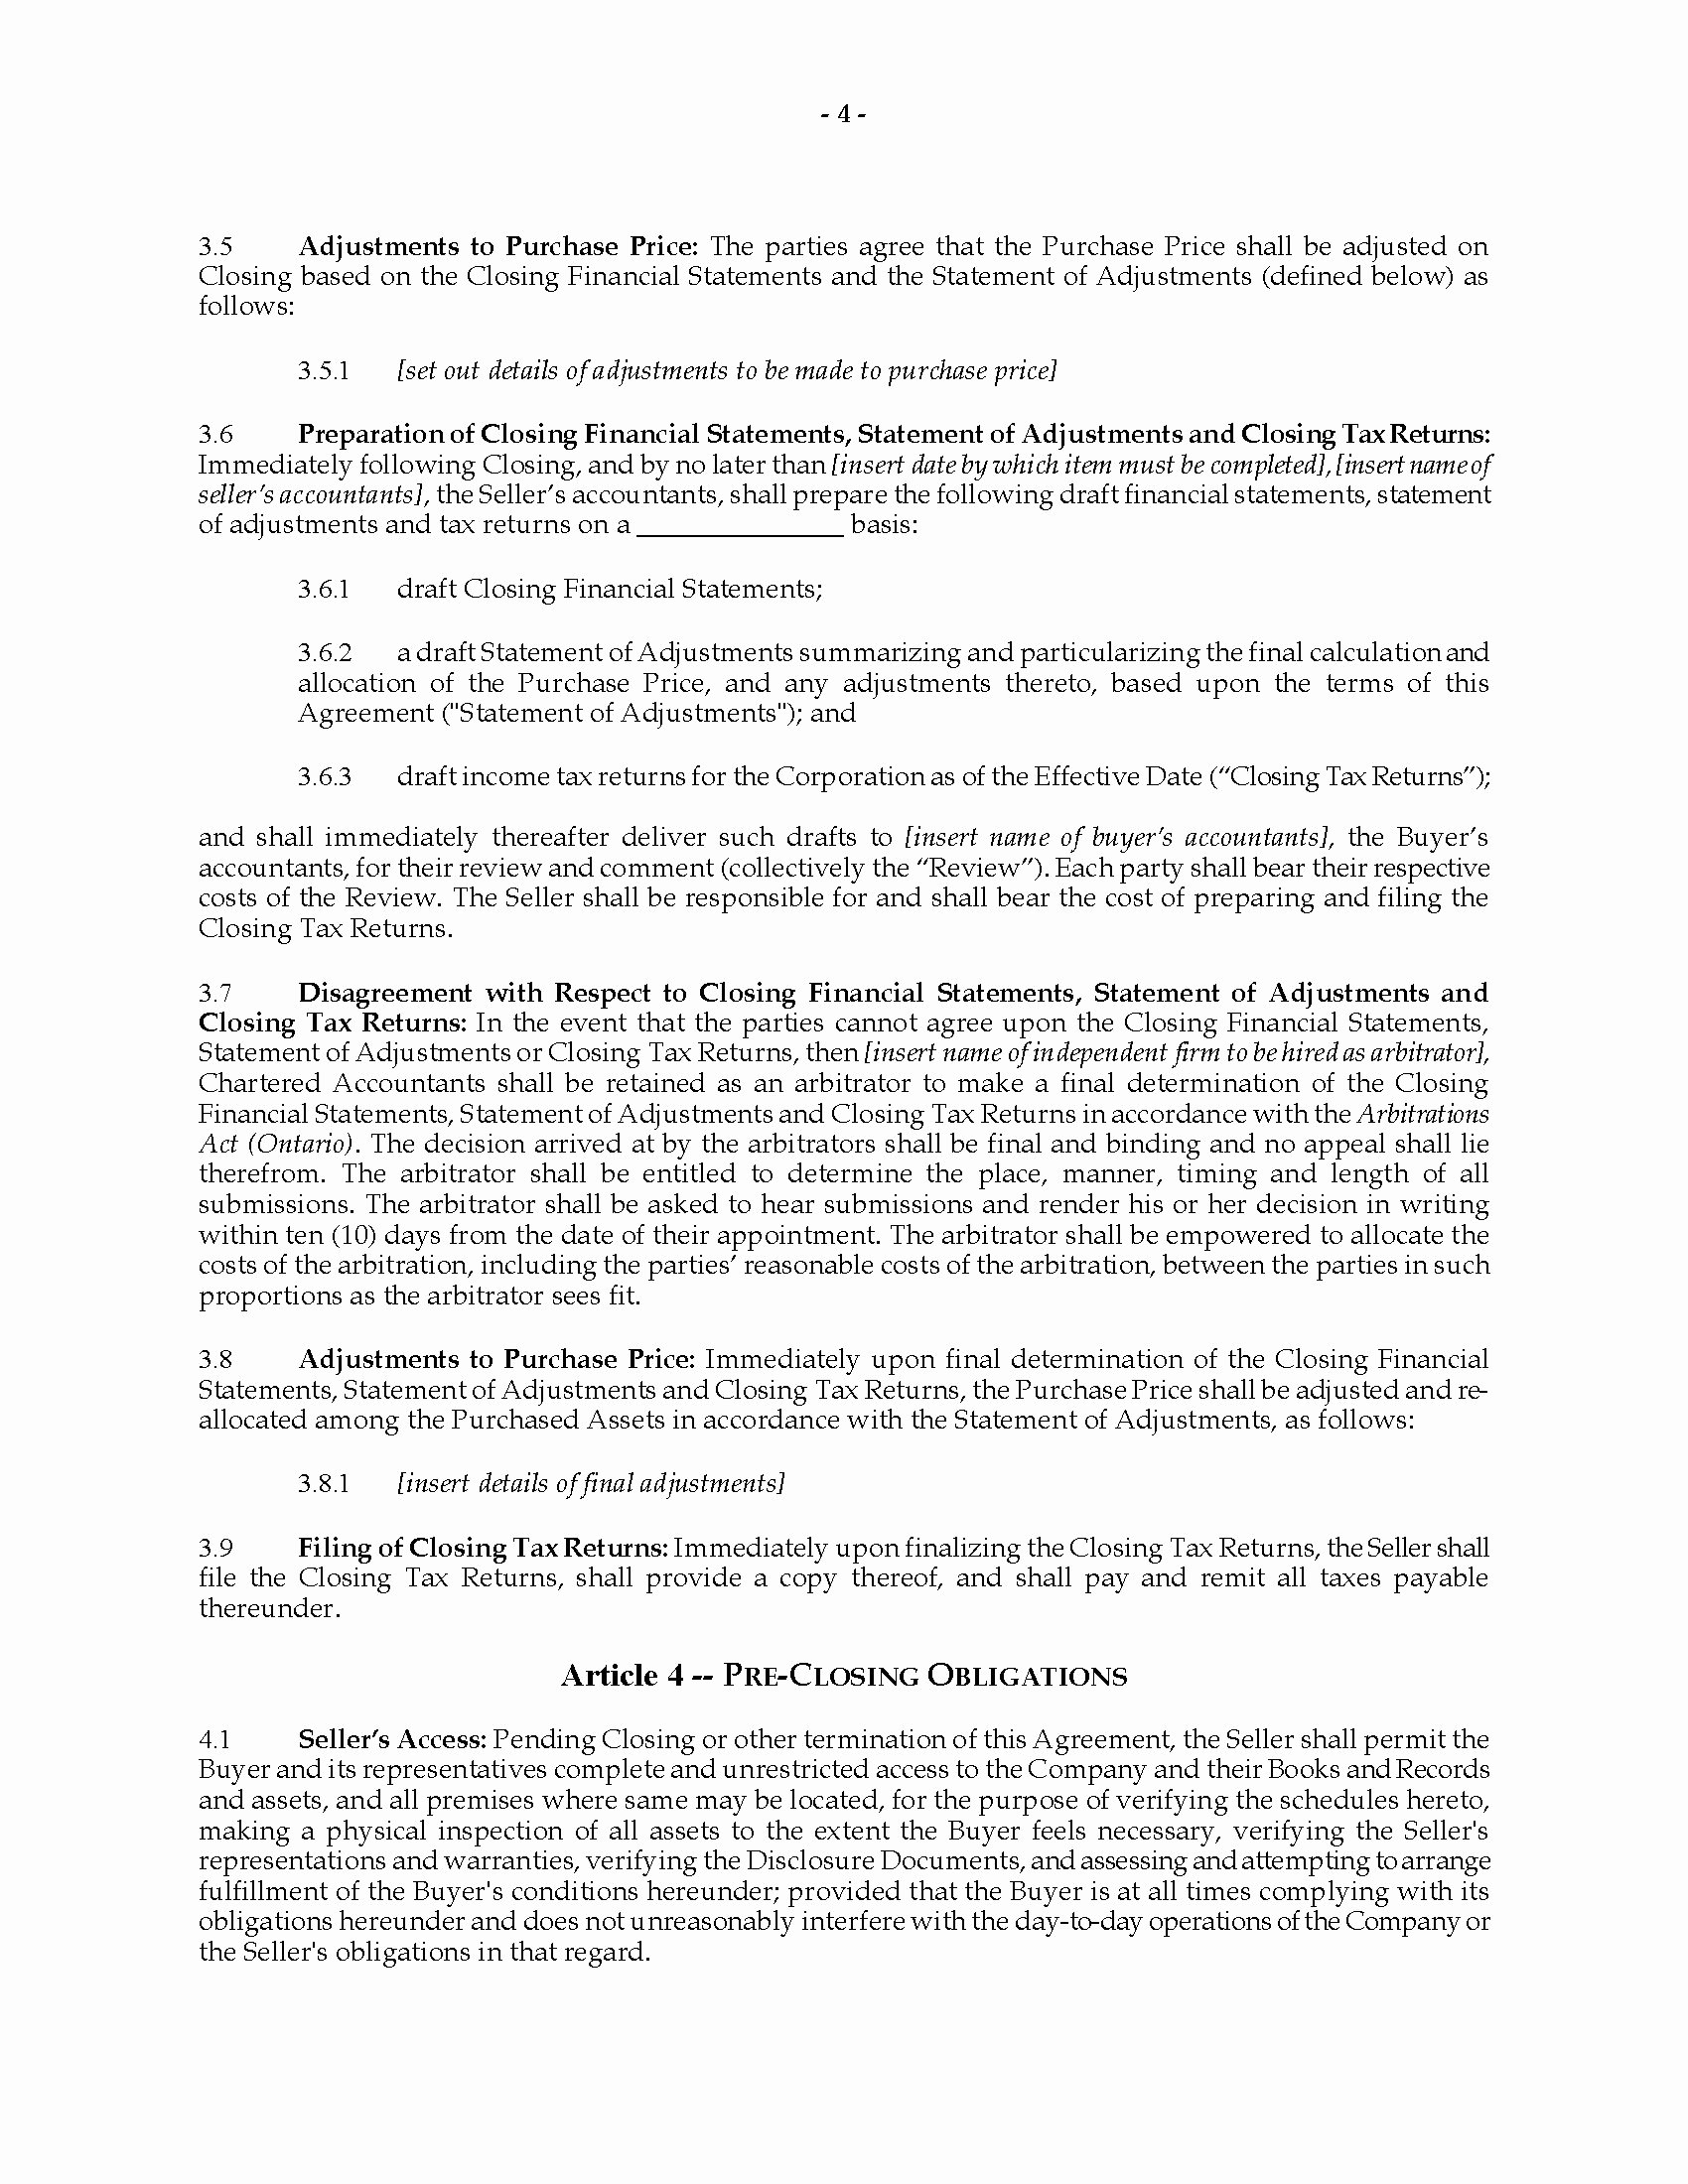 Share Purchase Agreement Template Beautiful Tario Purchase Agreement &amp; assignment Of